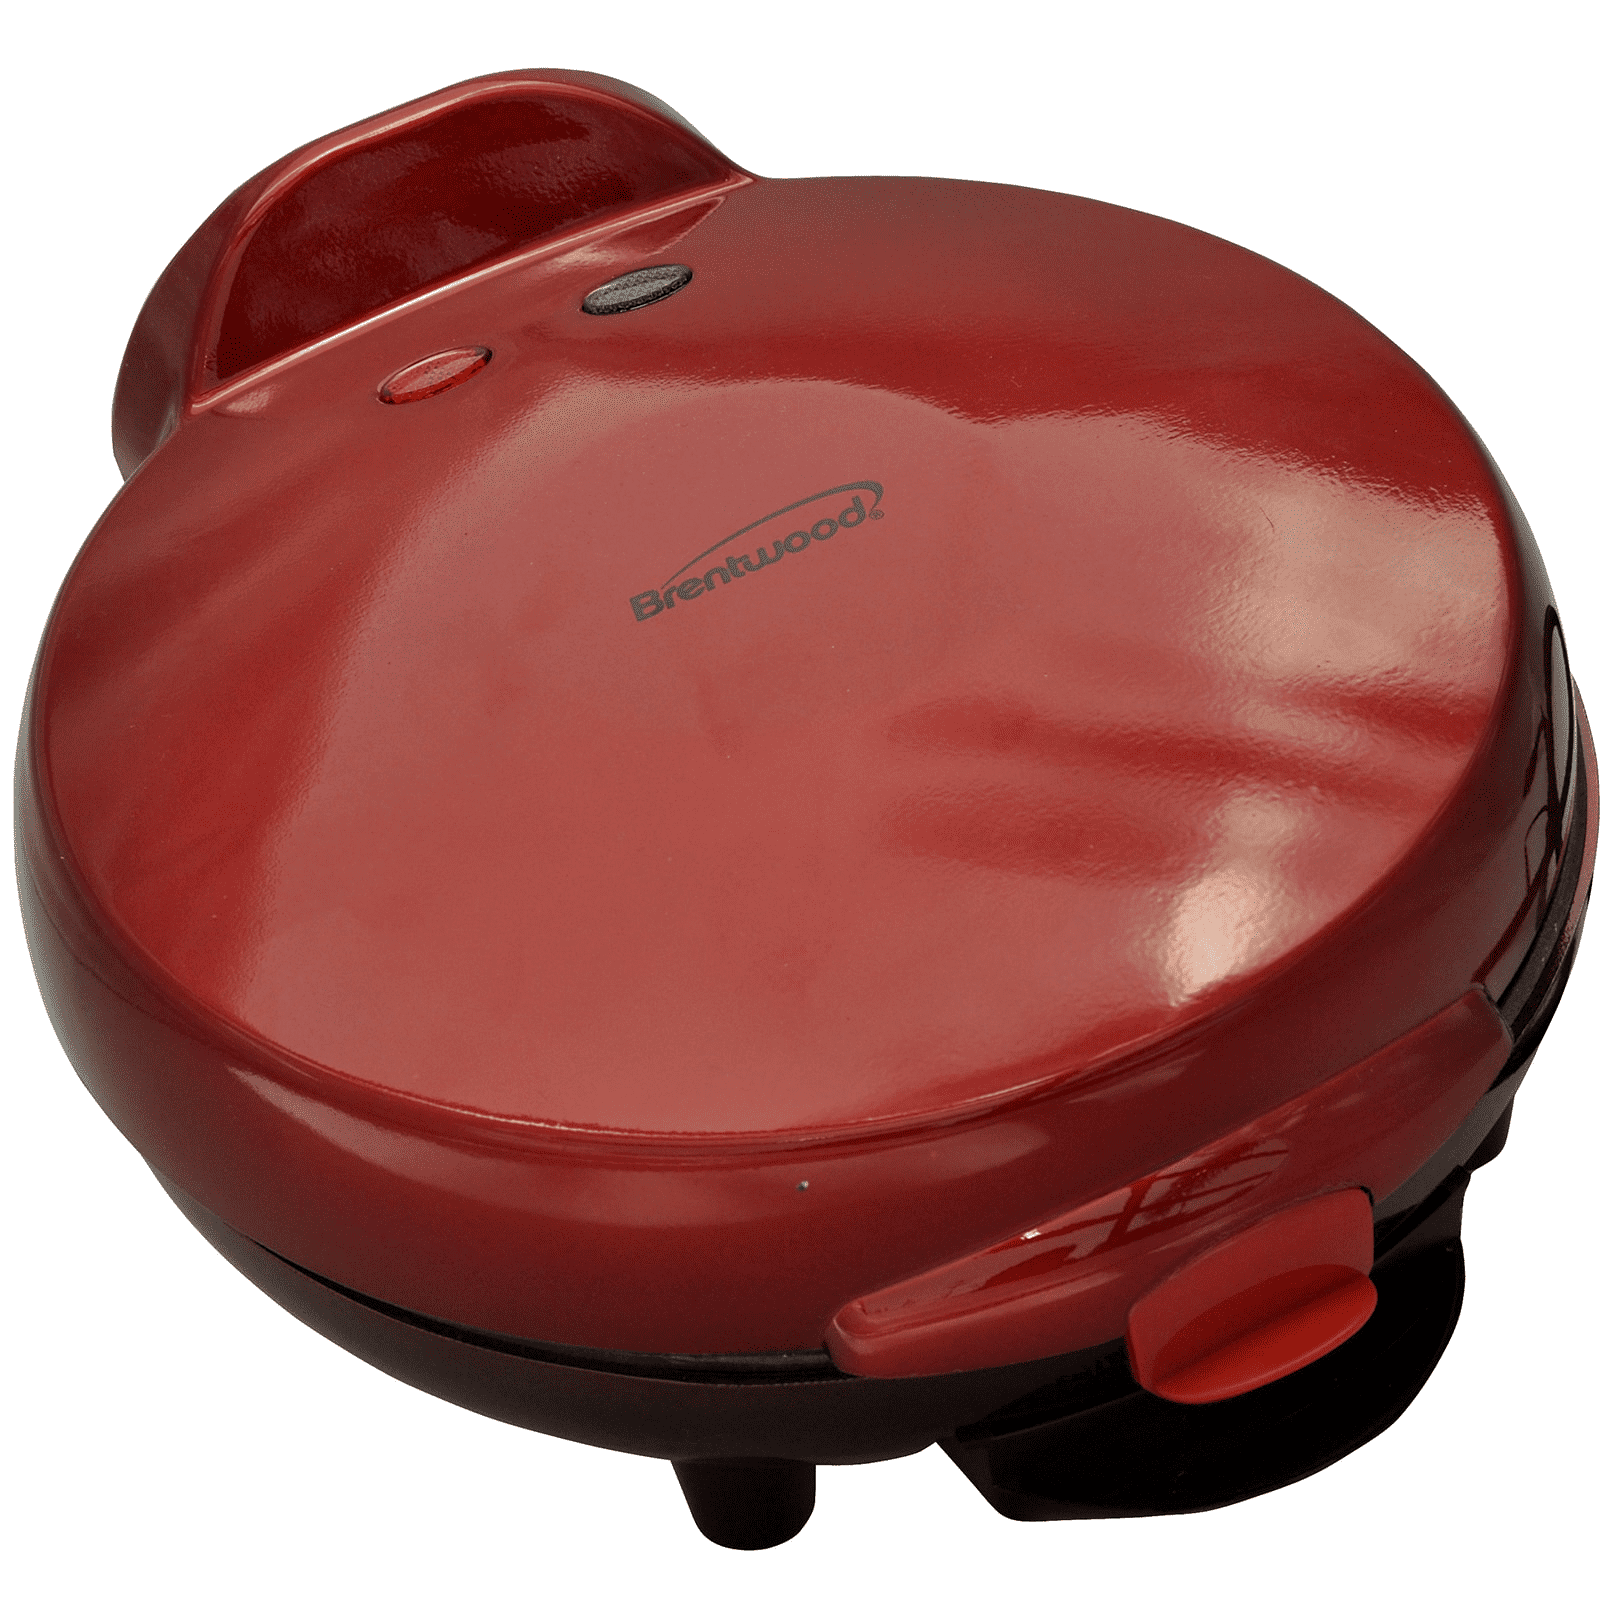 Picture of Brentwood TS-120 Quesadilla Maker. Red